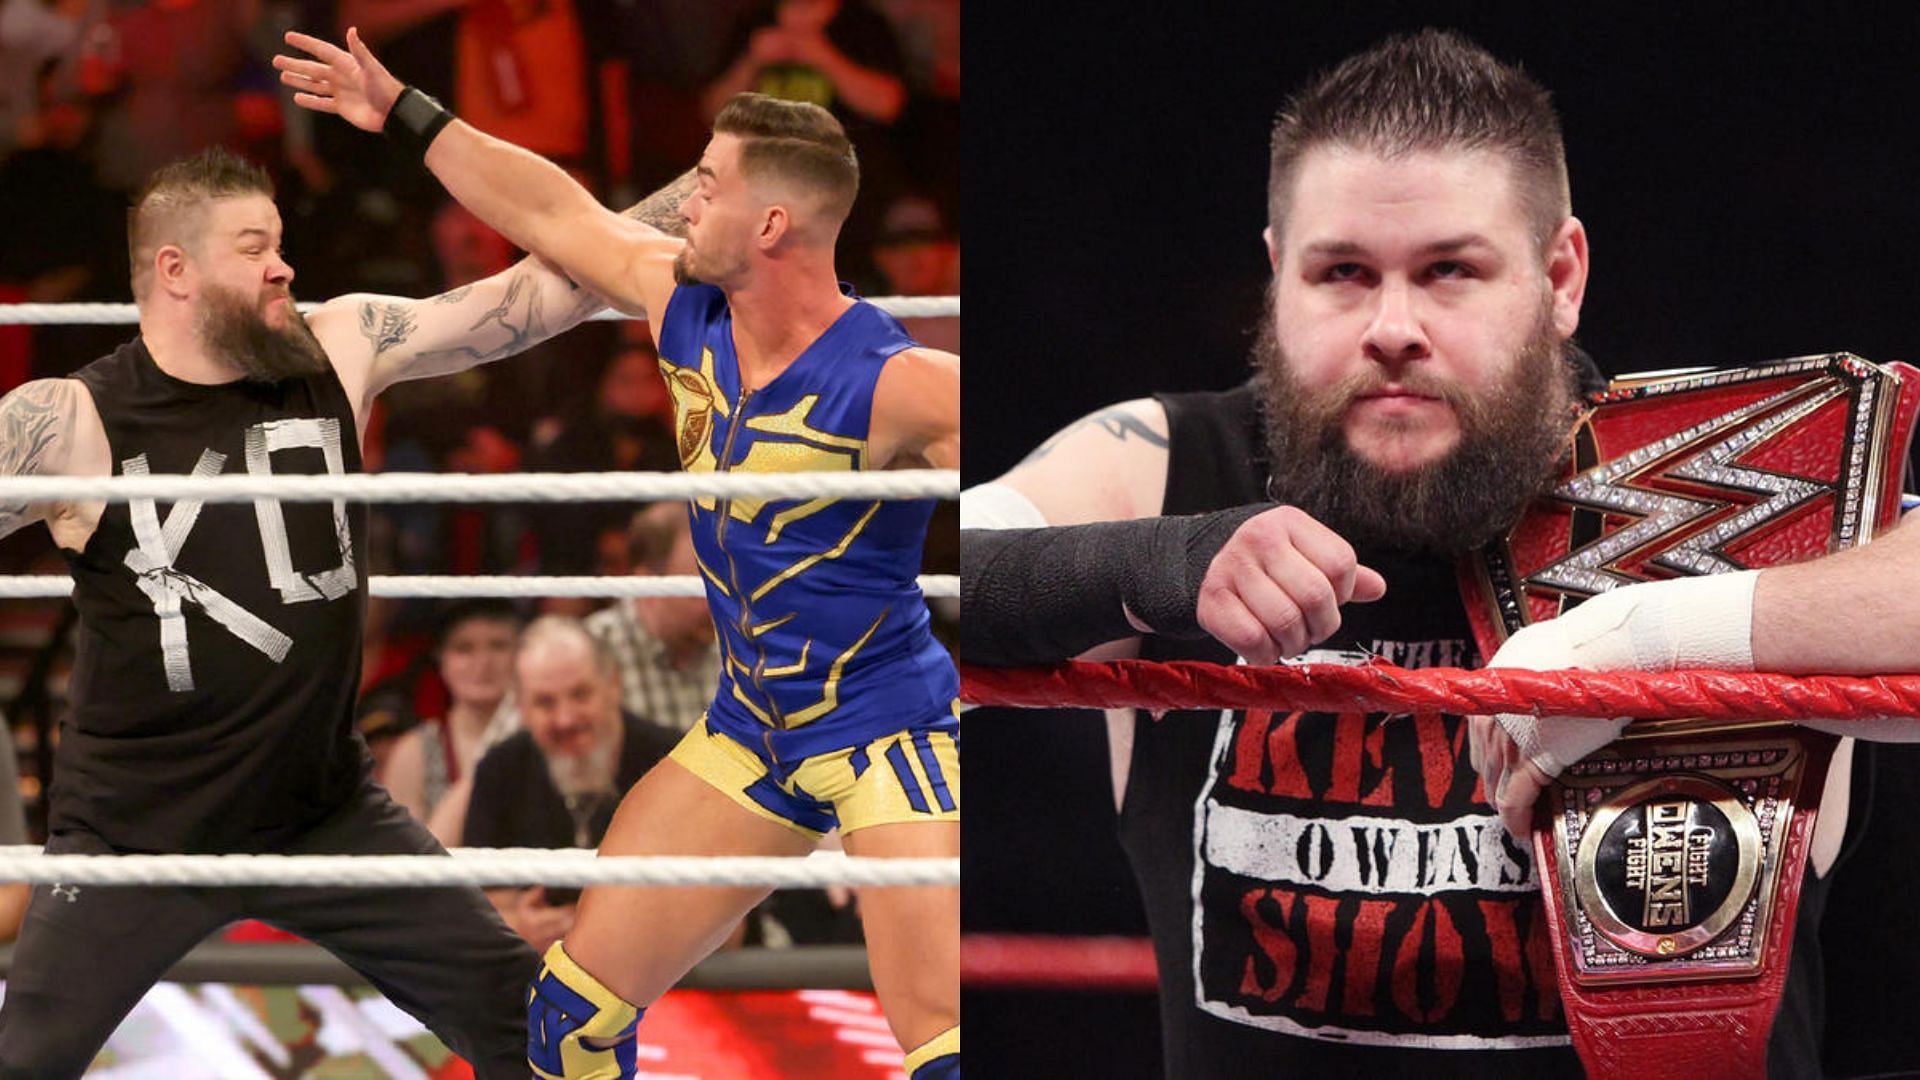 Kevin Owens needs to become Mr. Money in the Bank